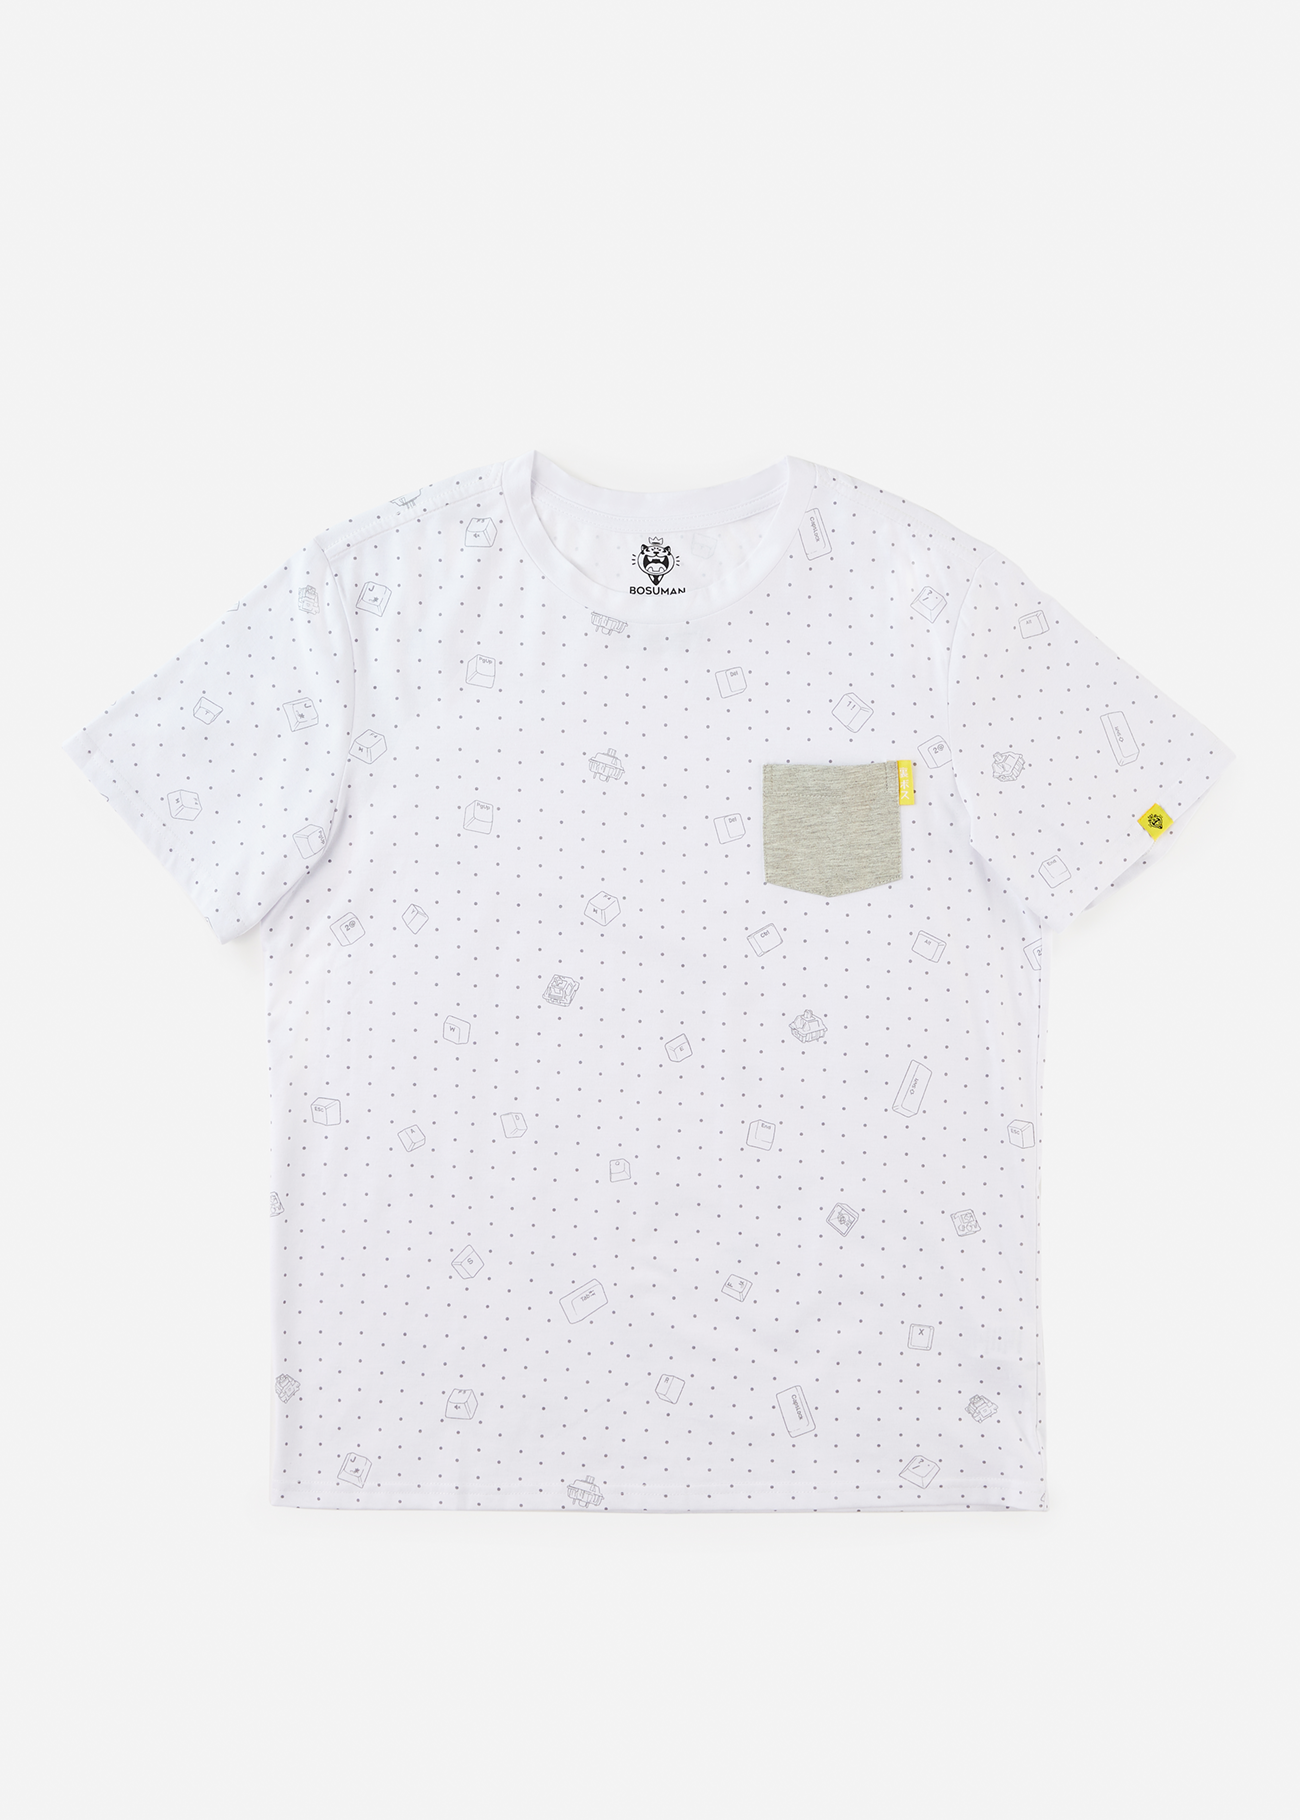 A photo of the all over keycap print on a pocket tee shirt